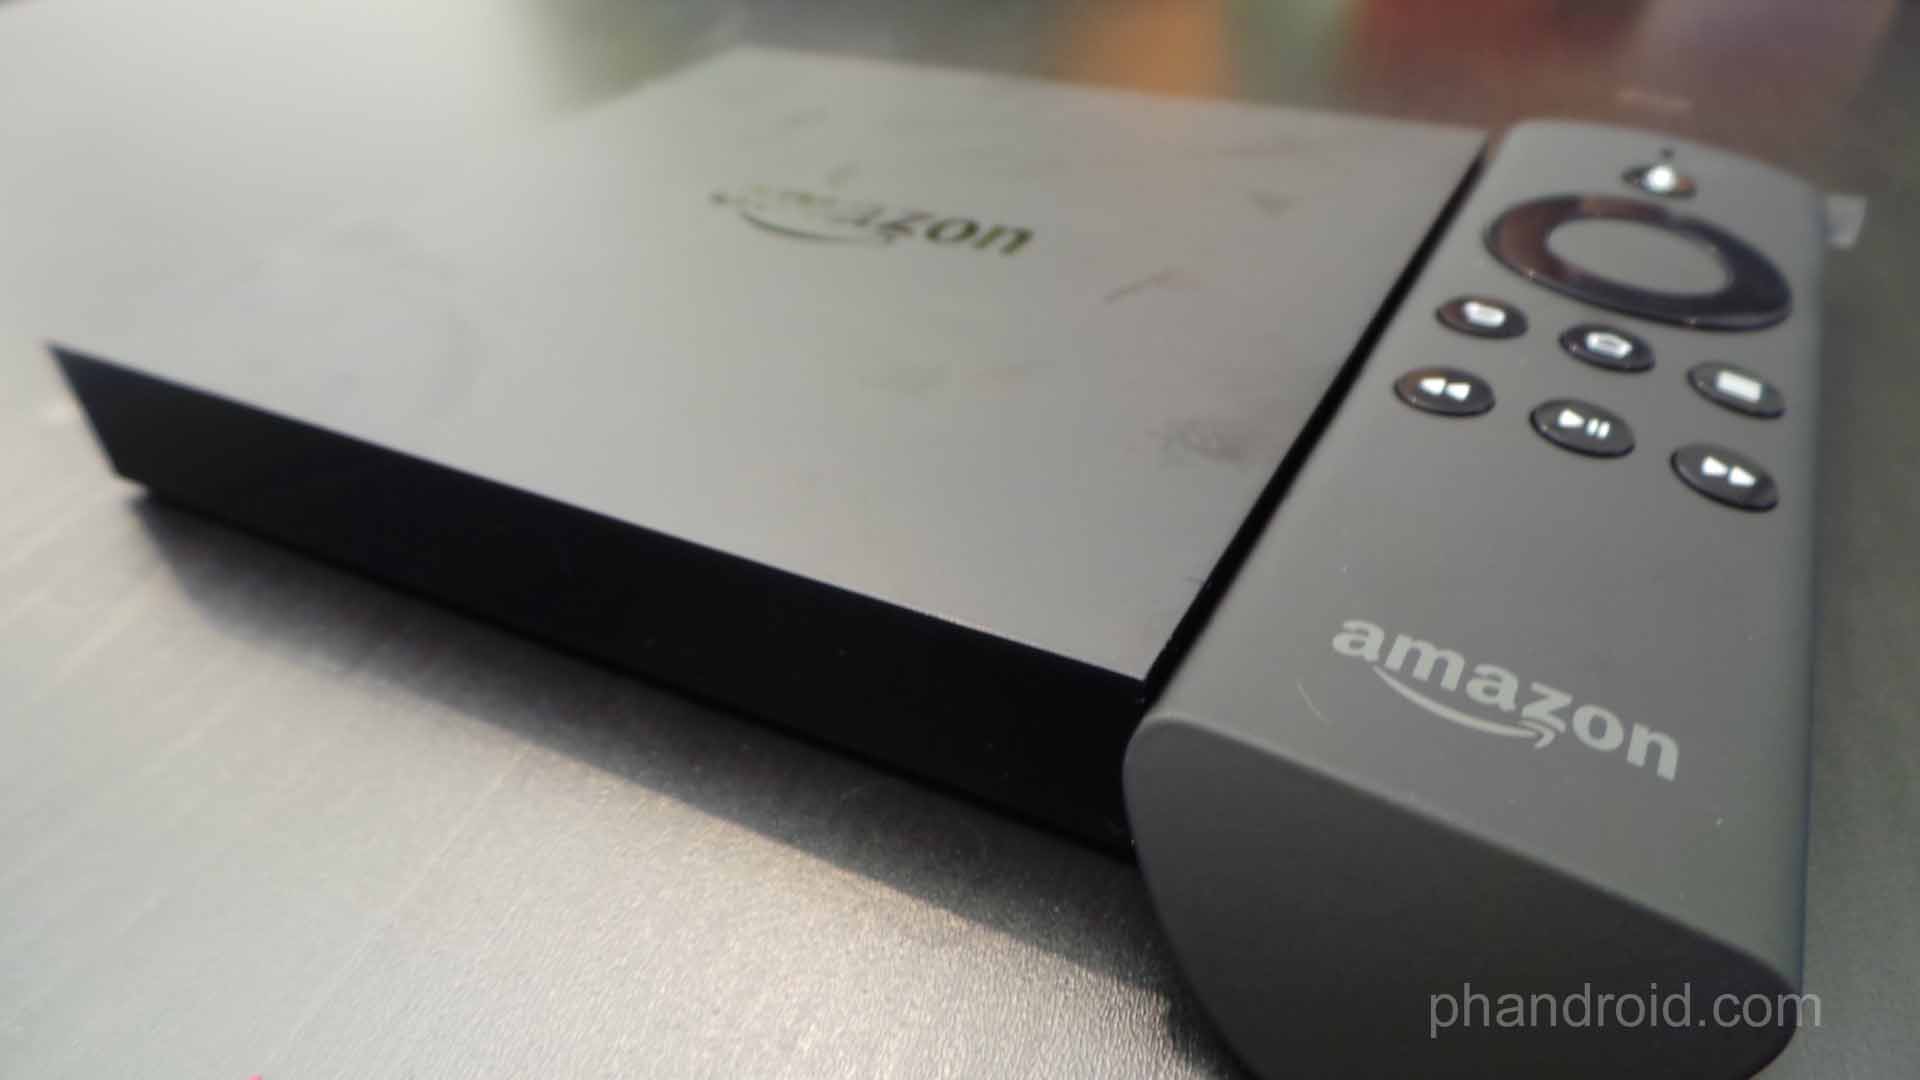 Amazon could ditch Android for its own custom OS &#8211; Phandroid